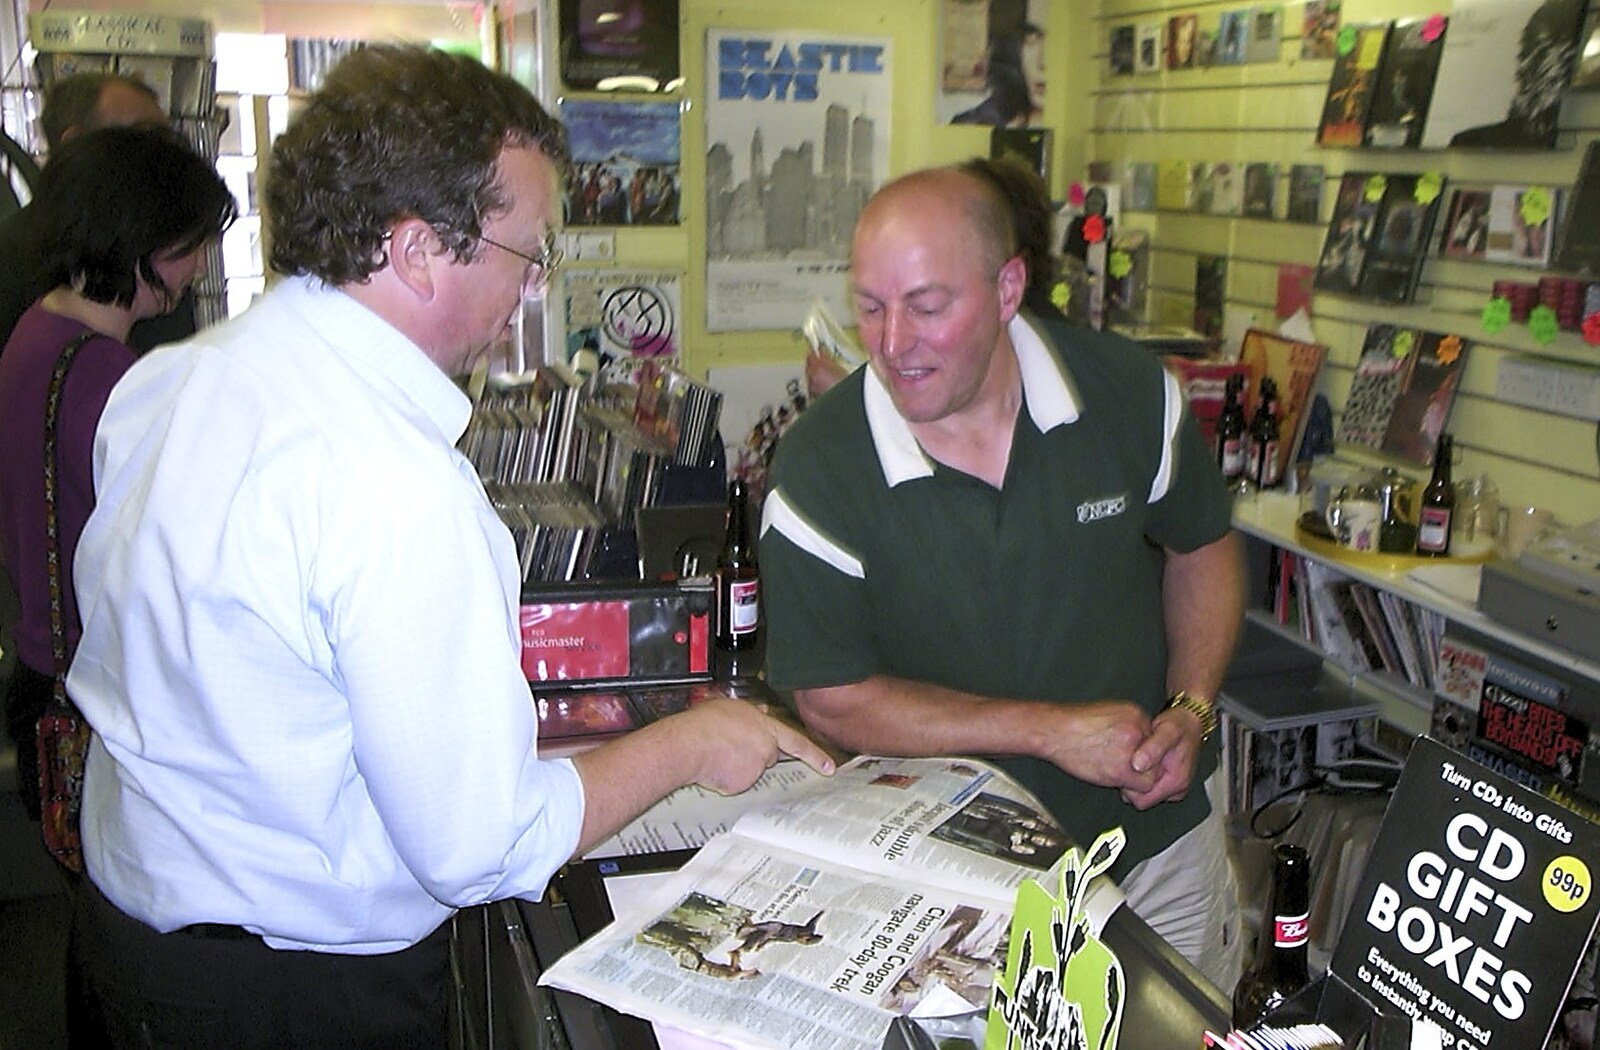 Wes chats to a customer from Longview play Revolution Records, Diss, Norfolk - 2nd July 2004